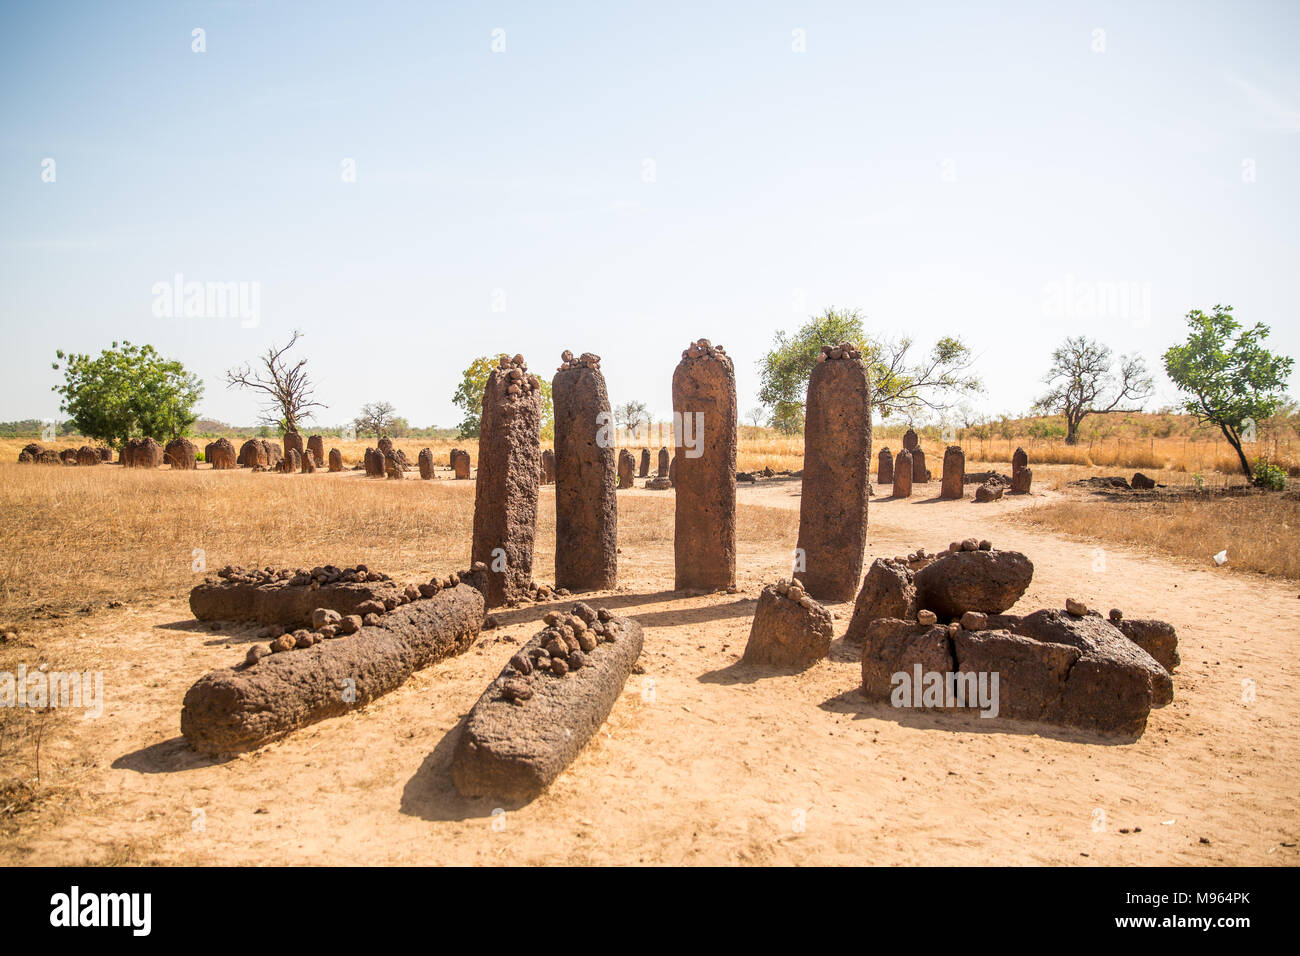 The Wassu Stone Circles (or megaliths), north of Janjanbureh,  is made up of 11 stone circles. The tallest stone is found in this area, with a height of 2.59 meters. Stock Photo